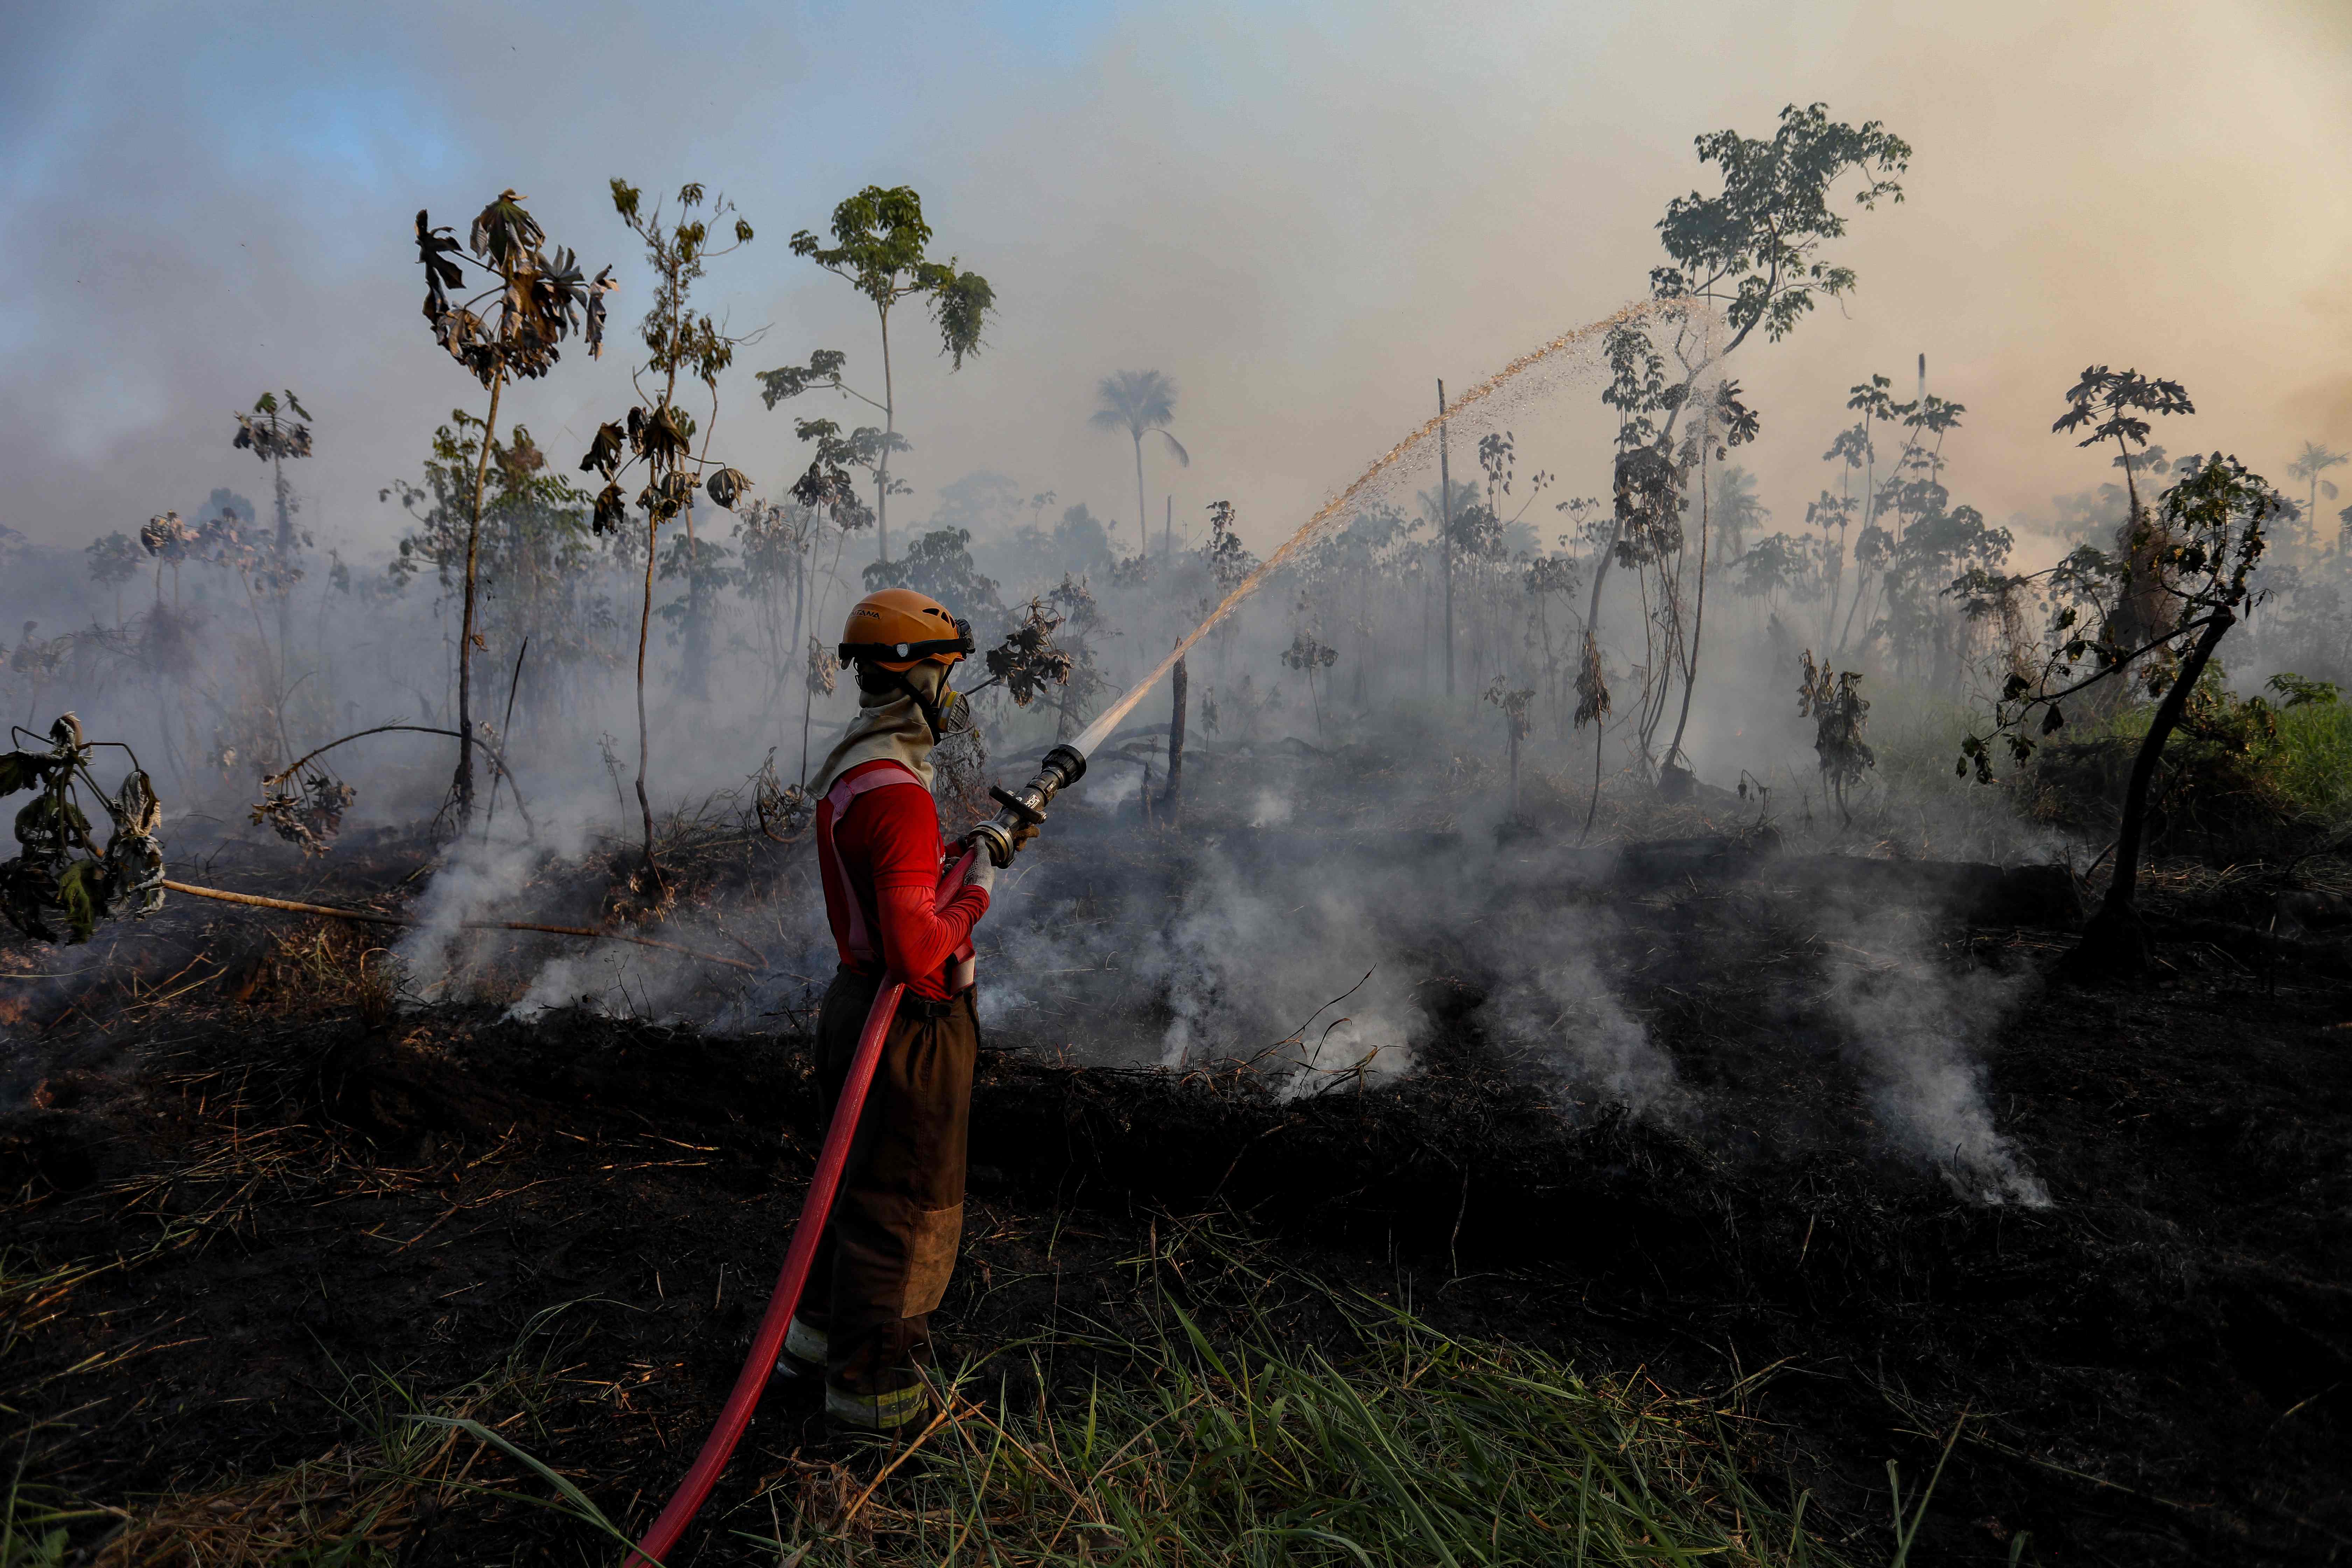 Firefighters try to put out an illegal fire in a forest area at the Cacau Pirera district in Iranduba, Amazonas state, Brazil on 25 September 2023. The Government of Amazonas declared a State of Environmental Emergency on 12 September due to the high number of fires and a strong drought in the rivers, affecting navigation and food distribution to the interior of the state